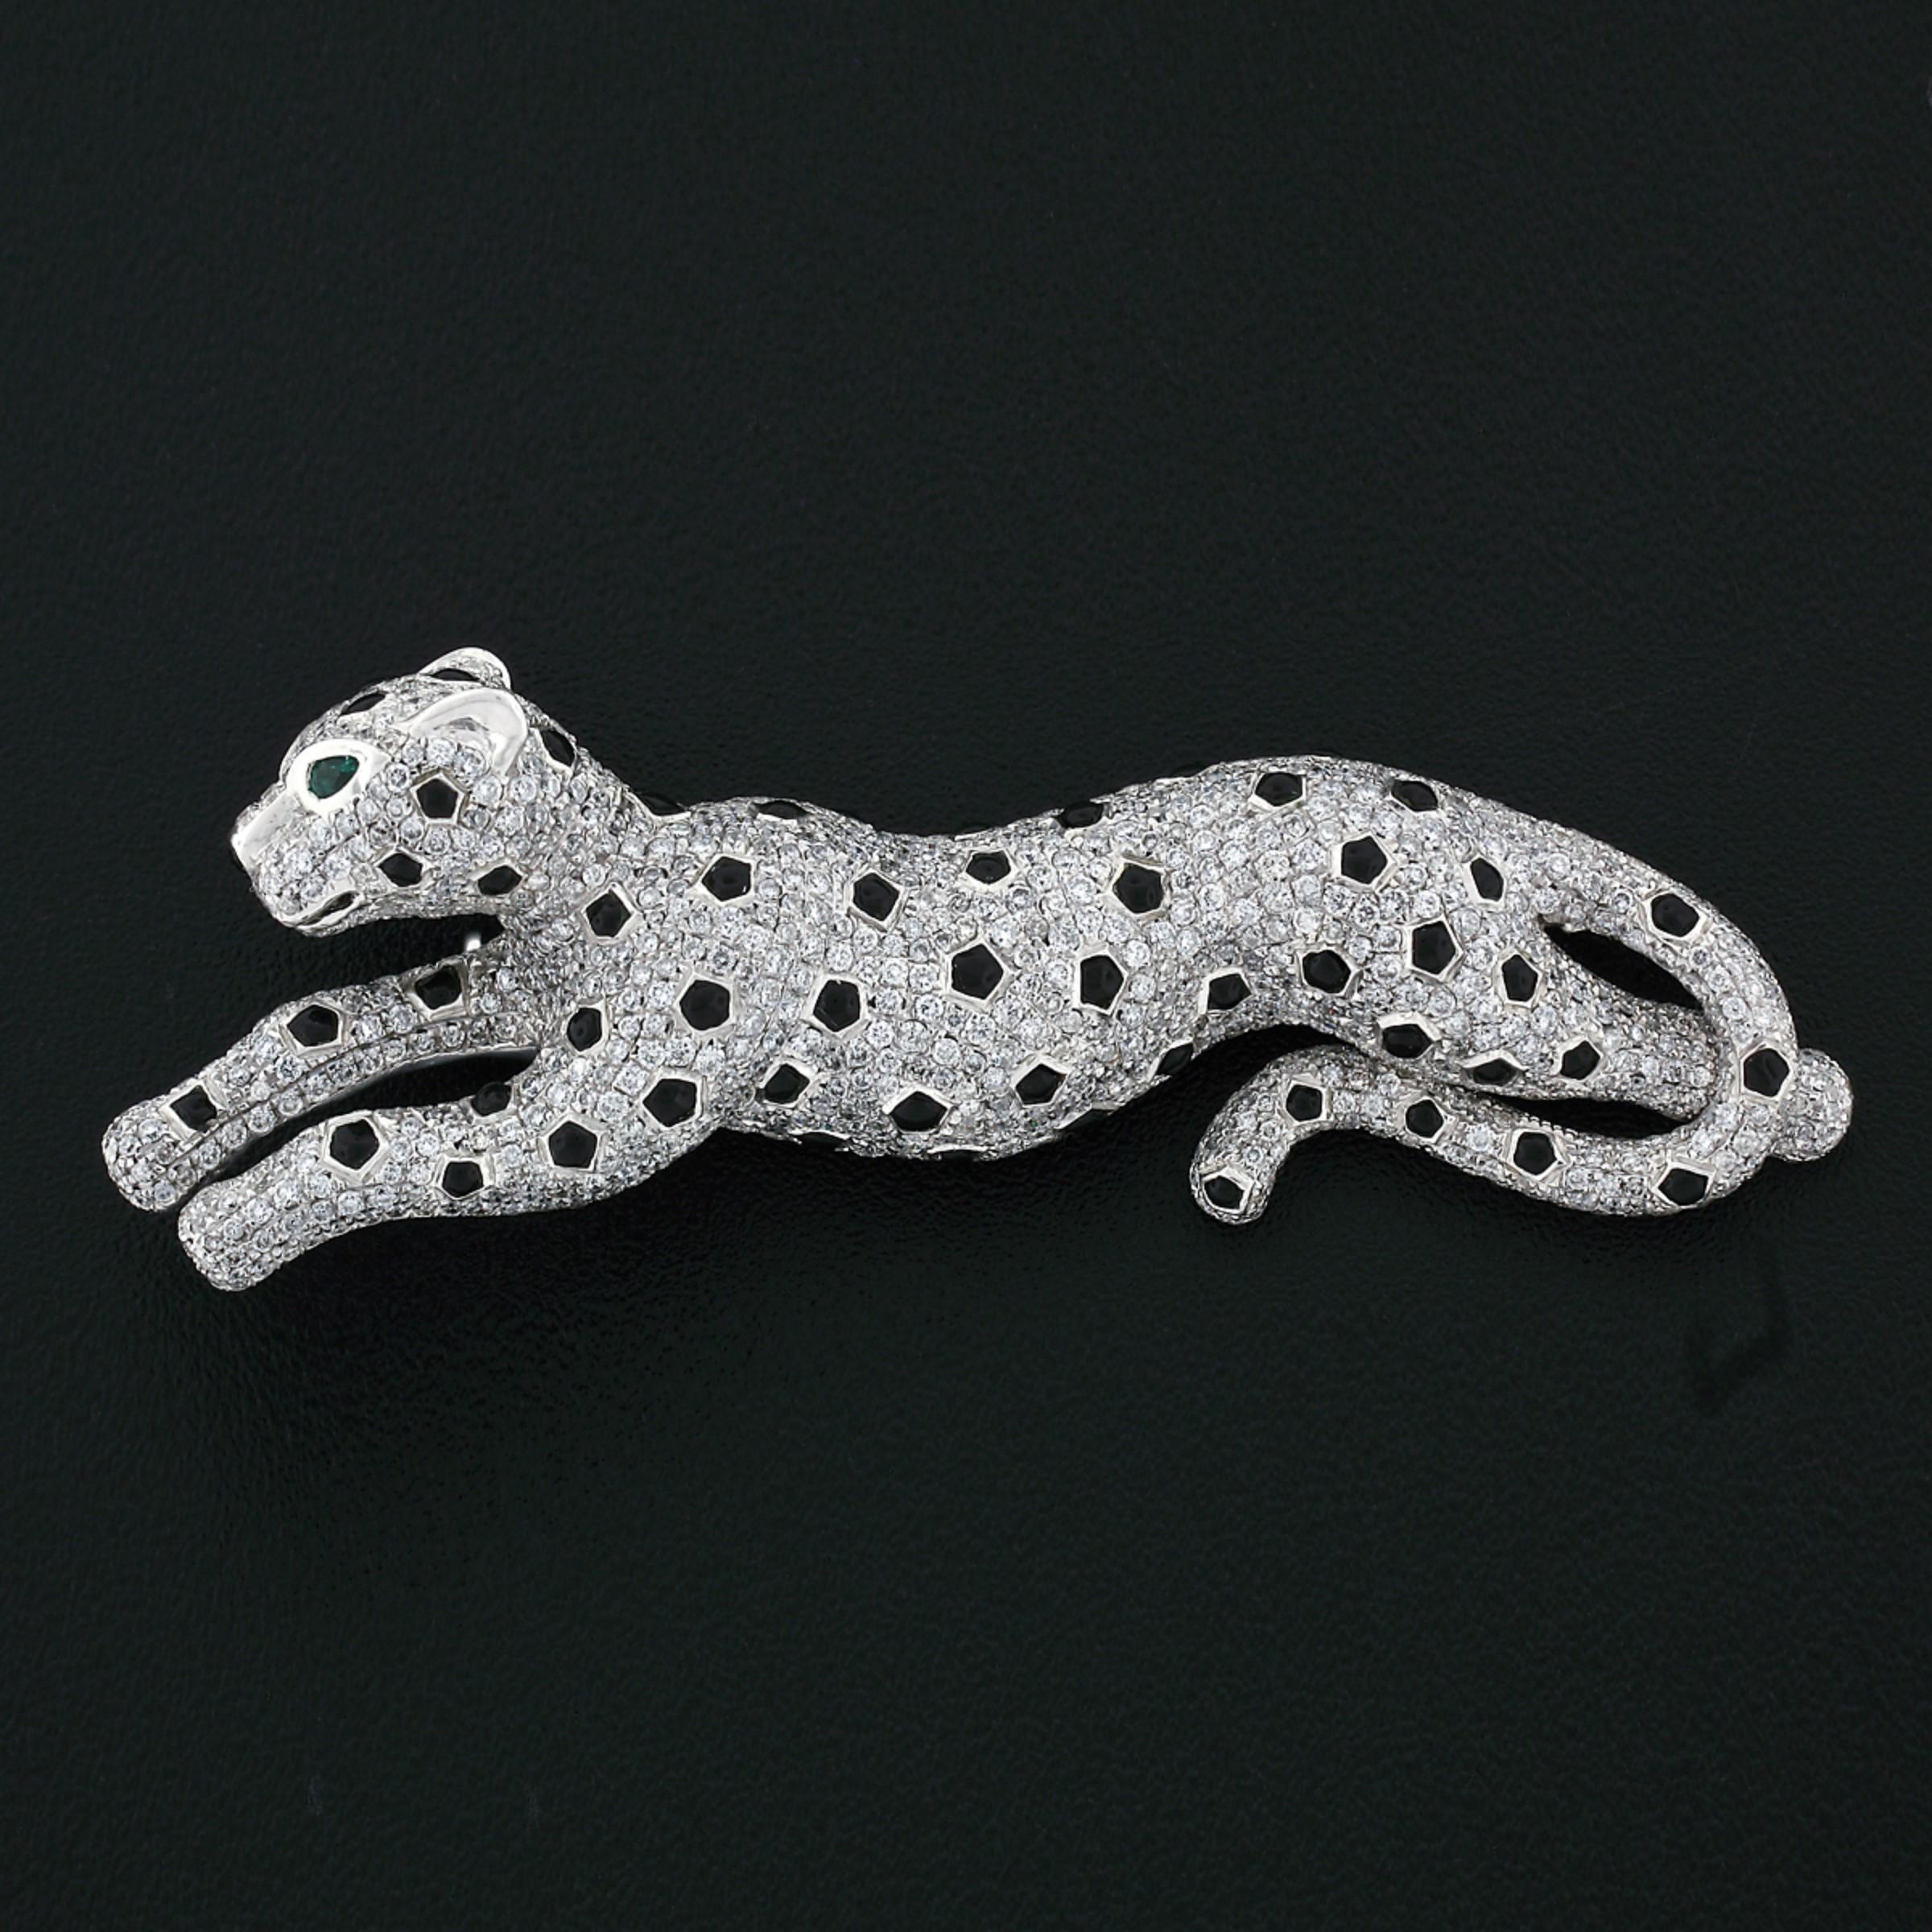 This gorgeous vintage brooch was crafted from solid 14k white gold and features a magnificently detailed leaping Panther/leopard design. The body of the Panther/leopard is drenched with exactly 3.30 carats of perfectly pavé set round brilliant cut